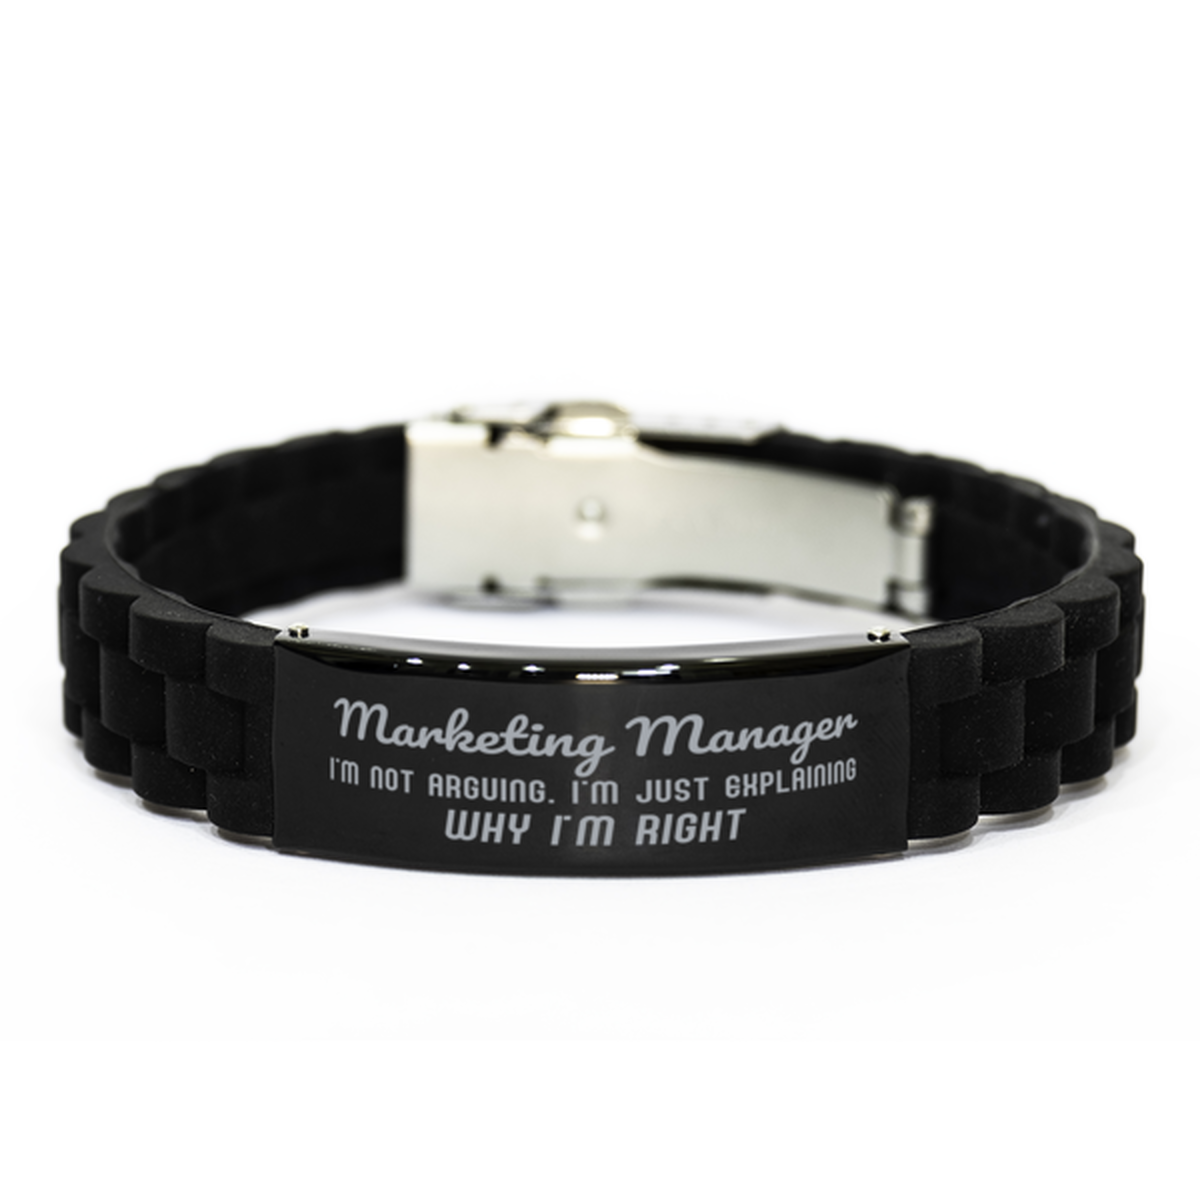 Marketing Manager I'm not Arguing. I'm Just Explaining Why I'm RIGHT Black Glidelock Clasp Bracelet, Funny Saying Quote Marketing Manager Gifts For Marketing Manager Graduation Birthday Christmas Gifts for Men Women Coworker